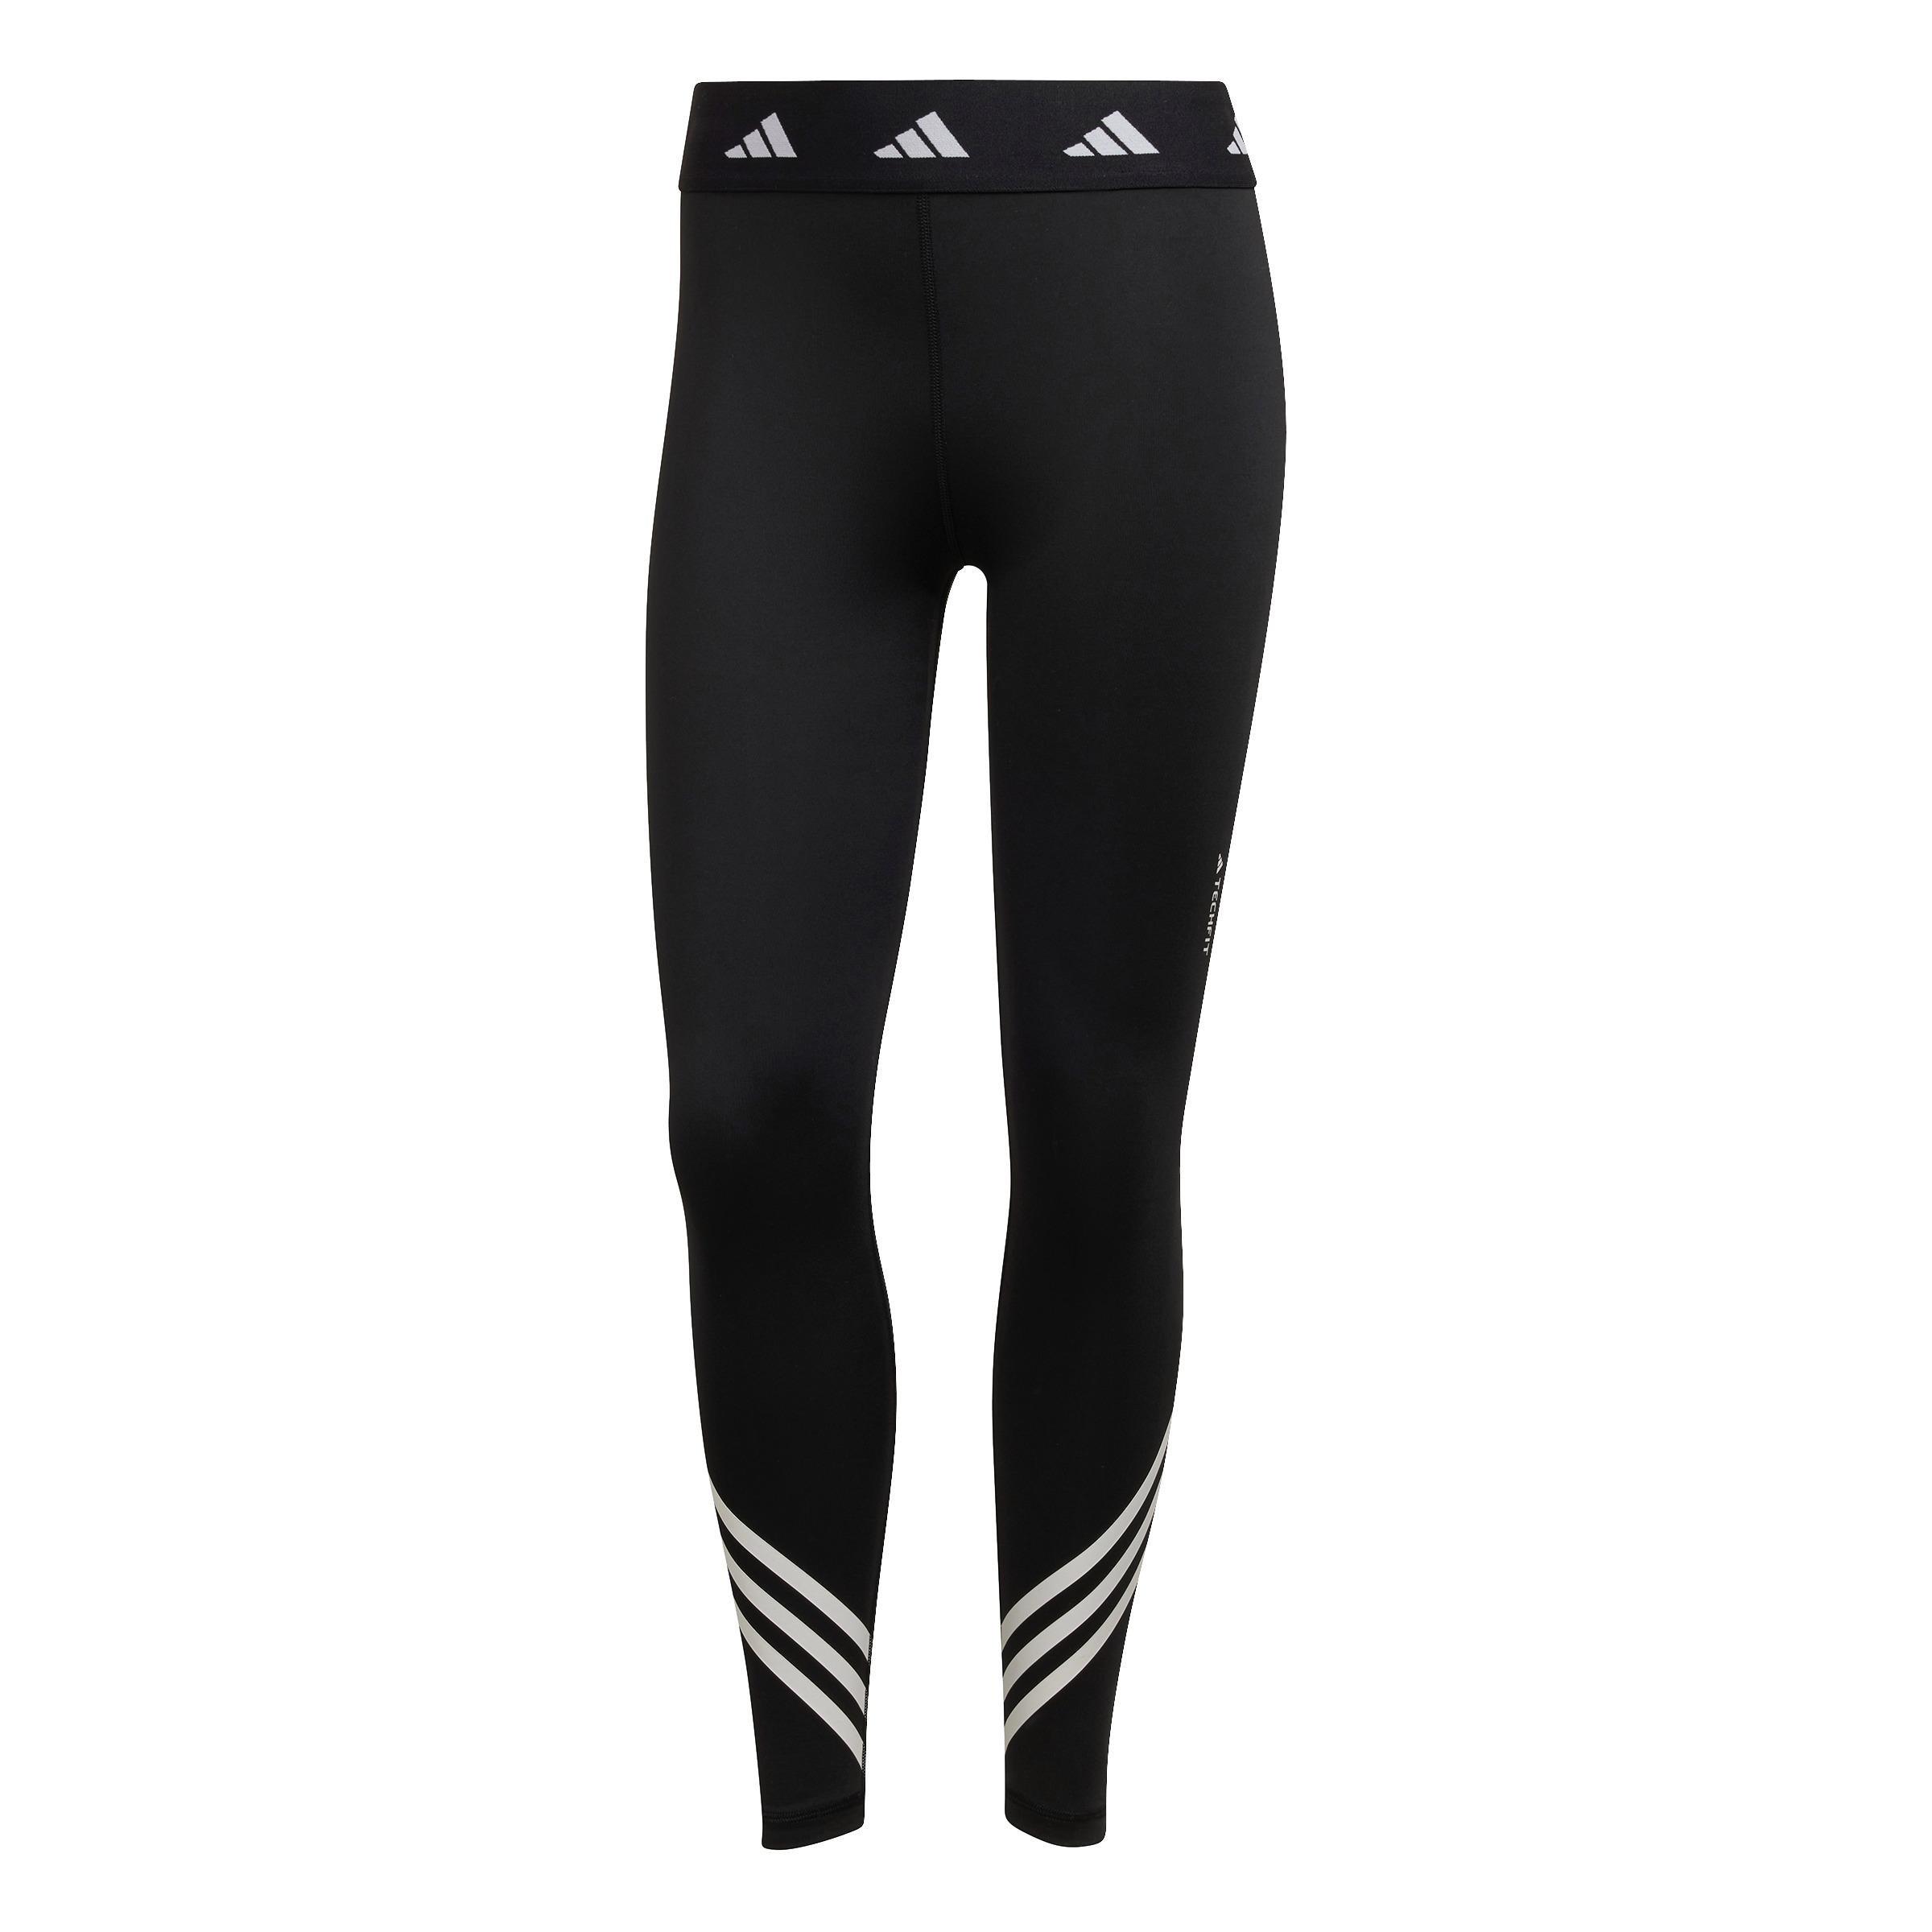 Sports Legging, 3 Stripe Life Collection Online